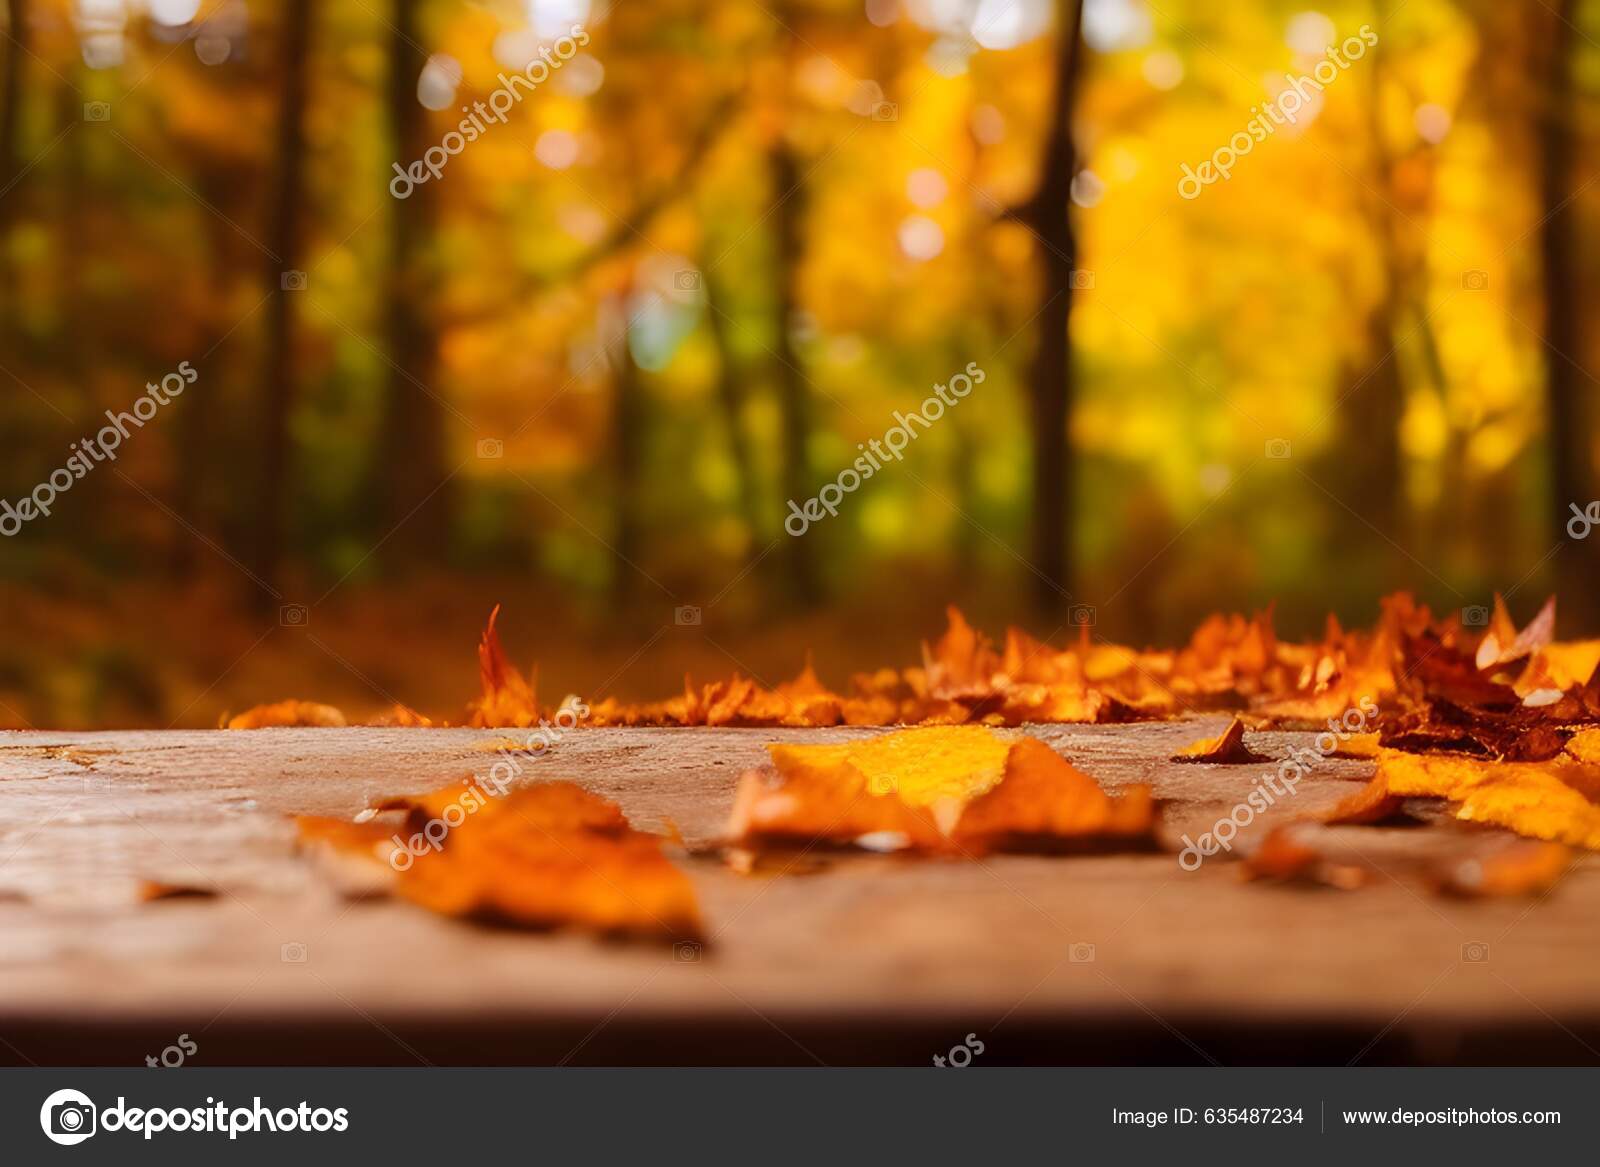 Fall background Stock Photos, Royalty Free Fall background Images |  Depositphotos